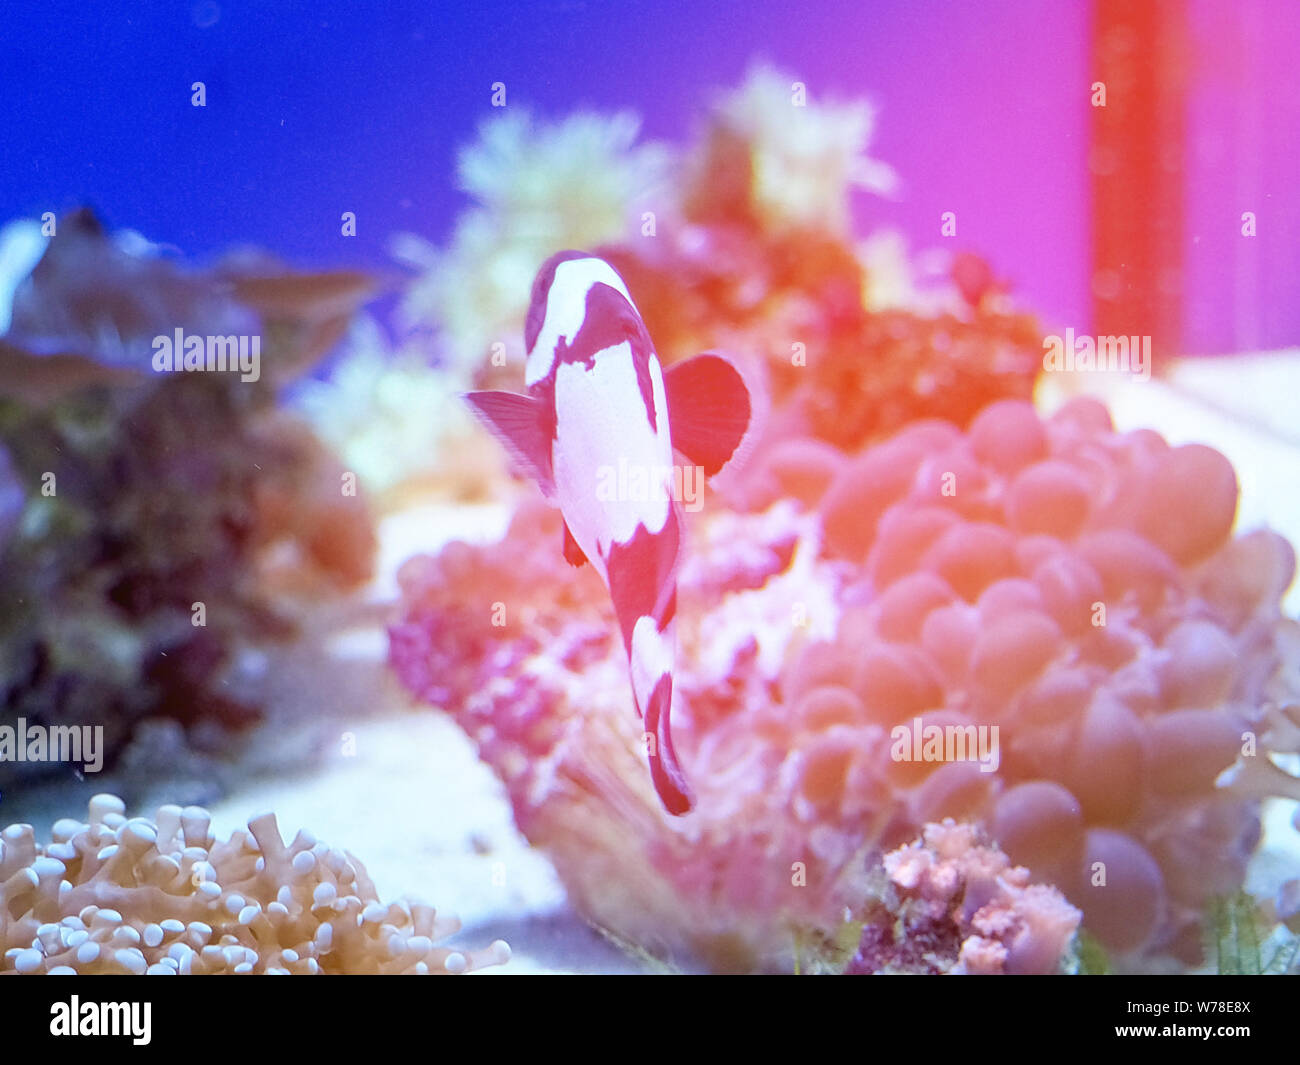 underwater coral reef landscape background in the deep blue ocean with colorful fish and marine life, blurred background Stock Photo